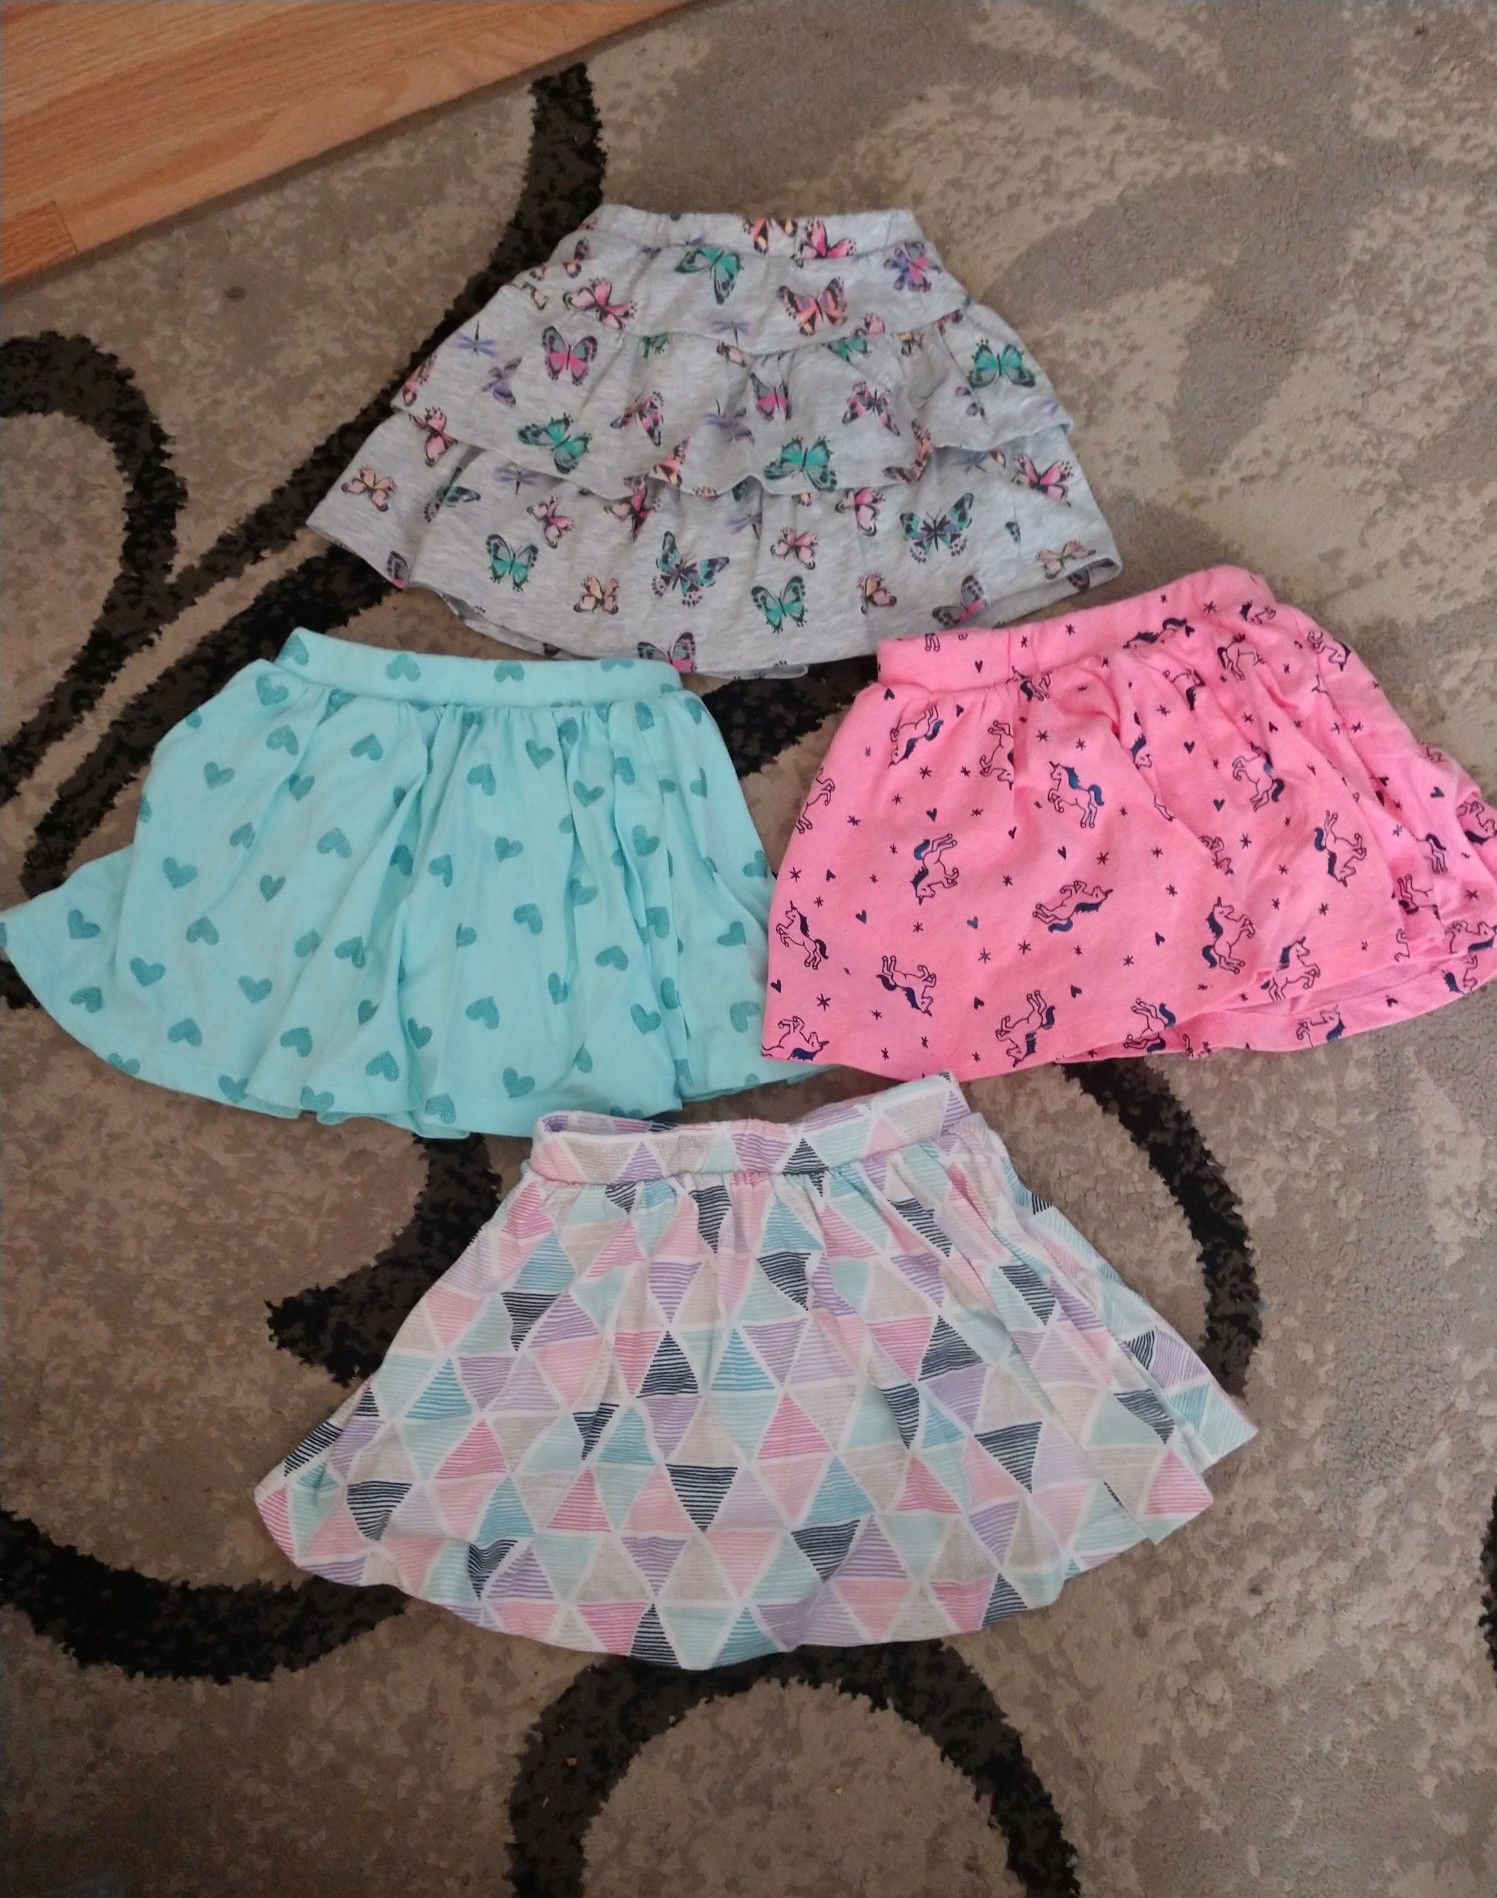 Toddler girls 18 months skirts and tanks.